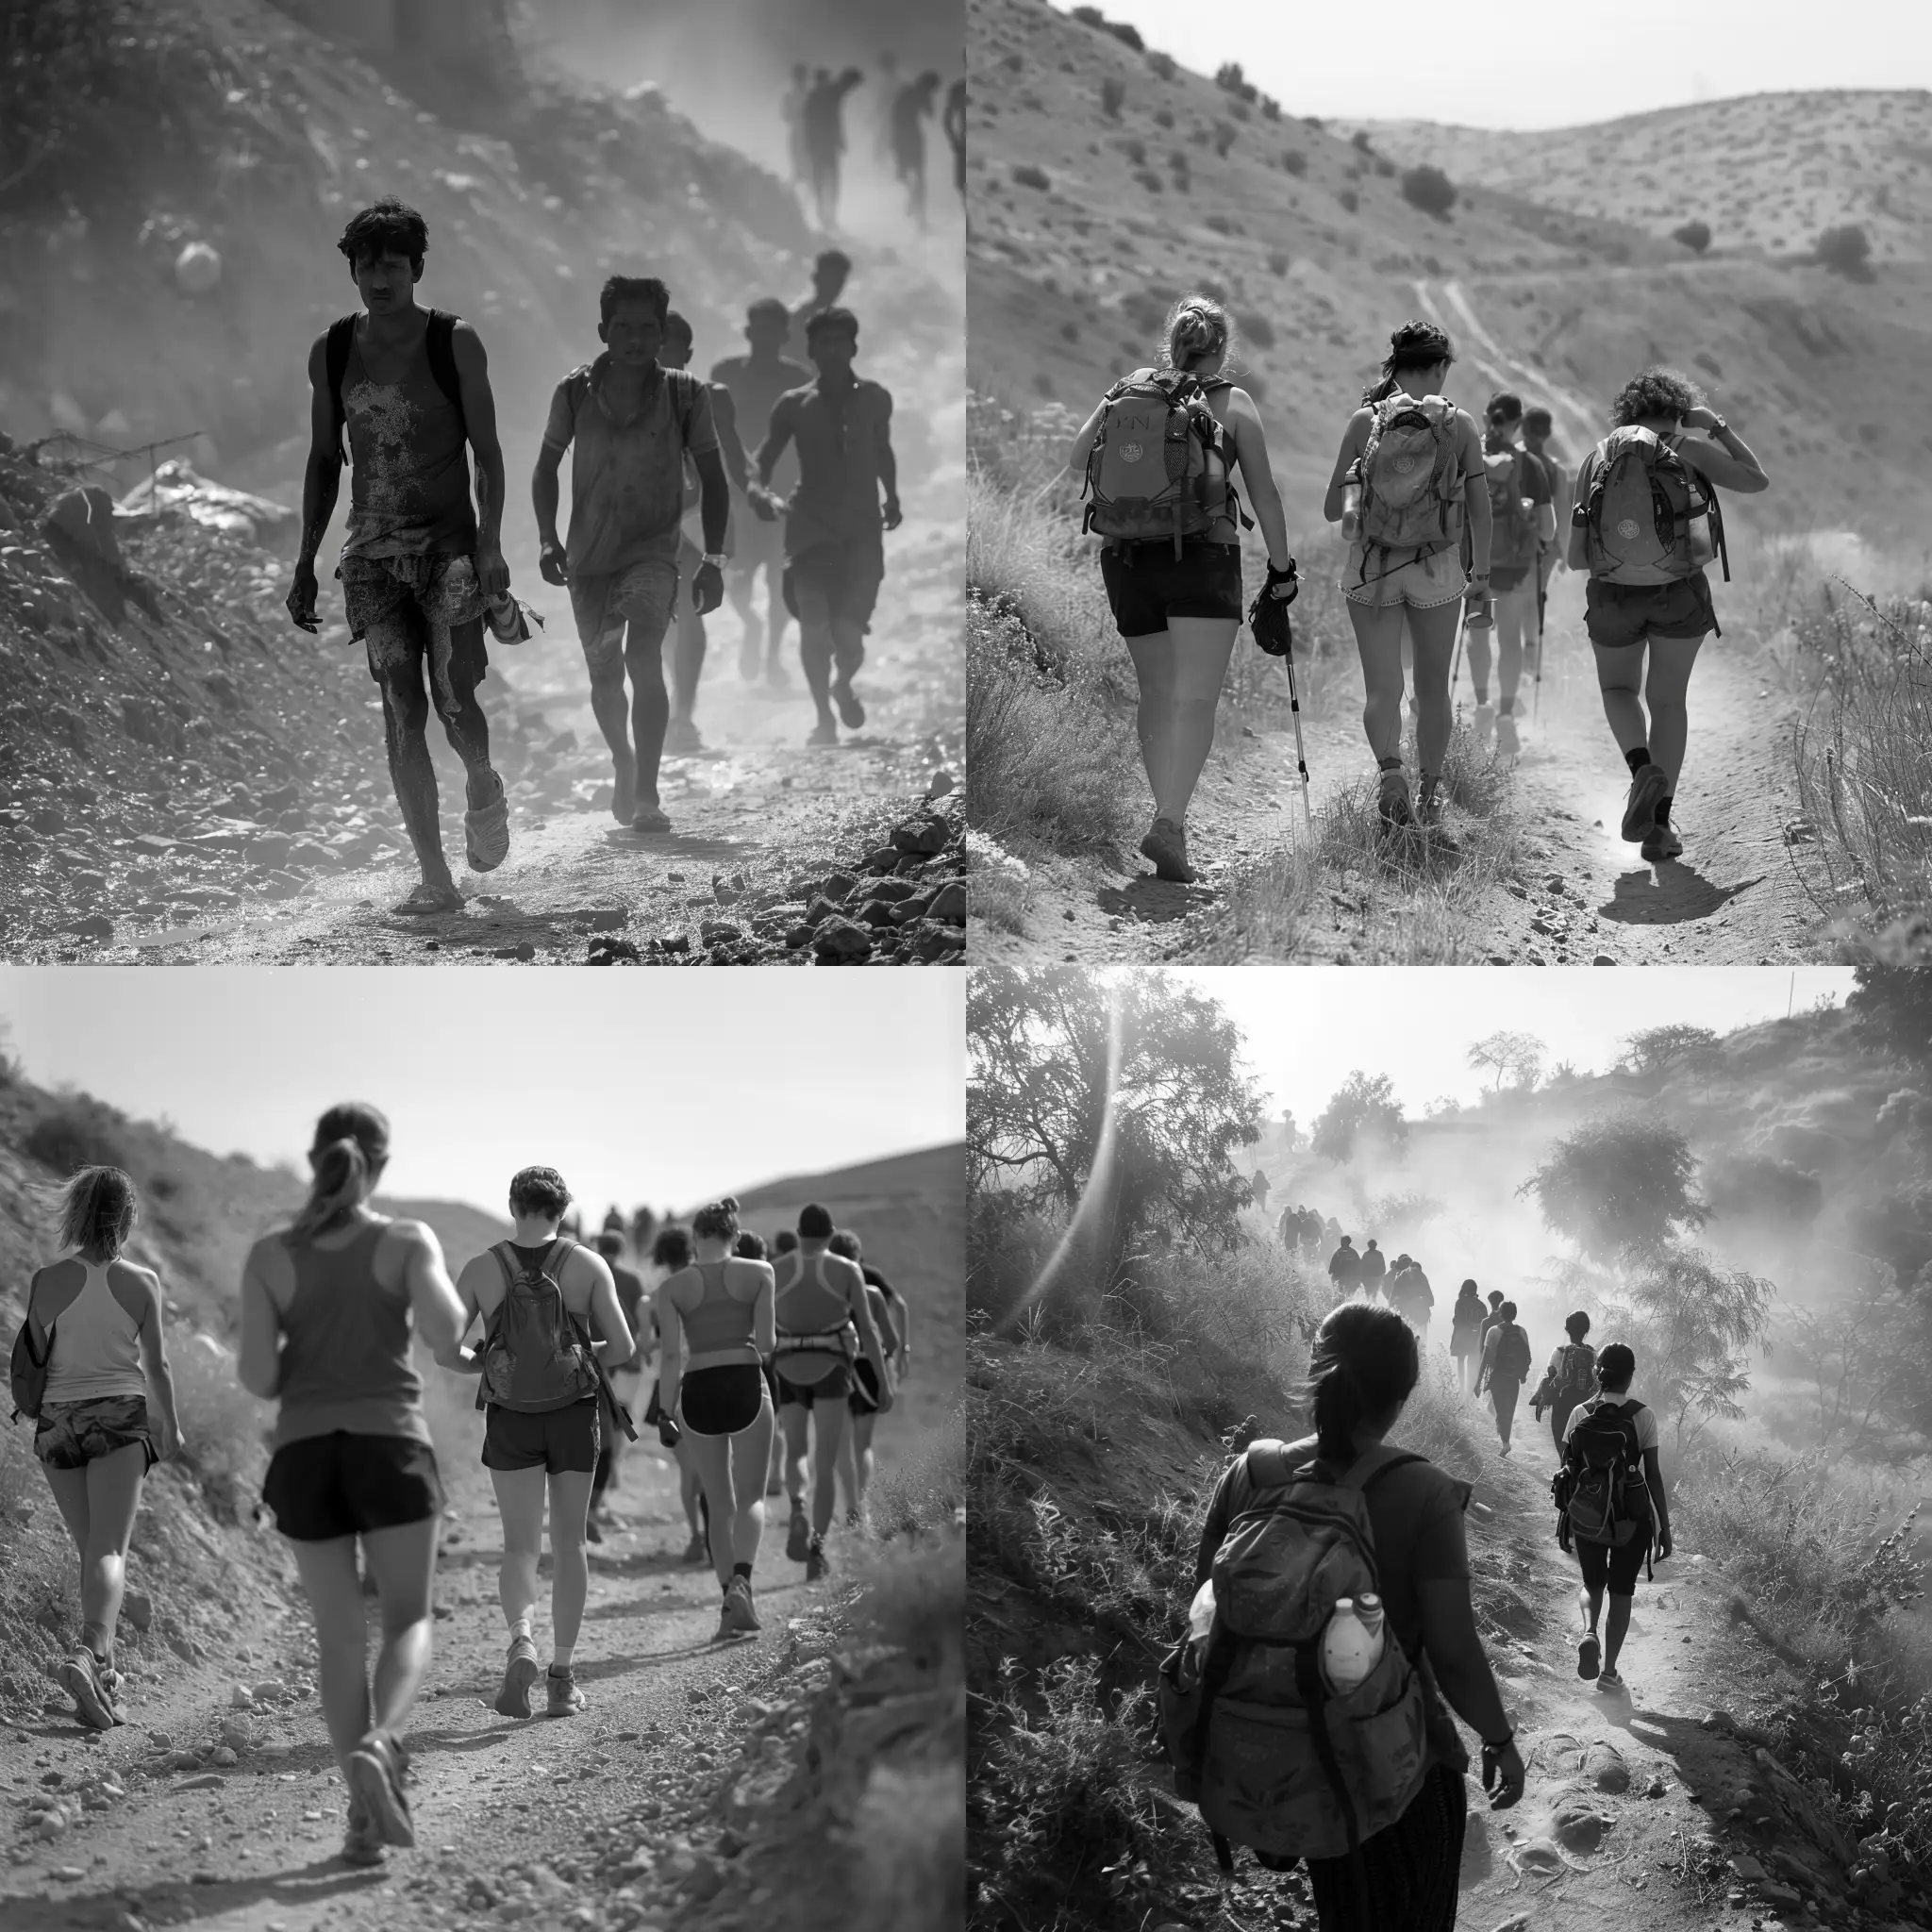 Their body language should convey some level of exertion and struggle.  Some might be wiping sweat from their brows, bent over slightly, or taking deep breaths. walking side-by-side in the middle.uphill on a dusty winding trail look hot and weary.

The image should capture the essence of a challenging but rewarding journey.  Despite the struggle of the uphill climb, the millennials are determined to reach the temple, a symbol of their faith and perseverance.

